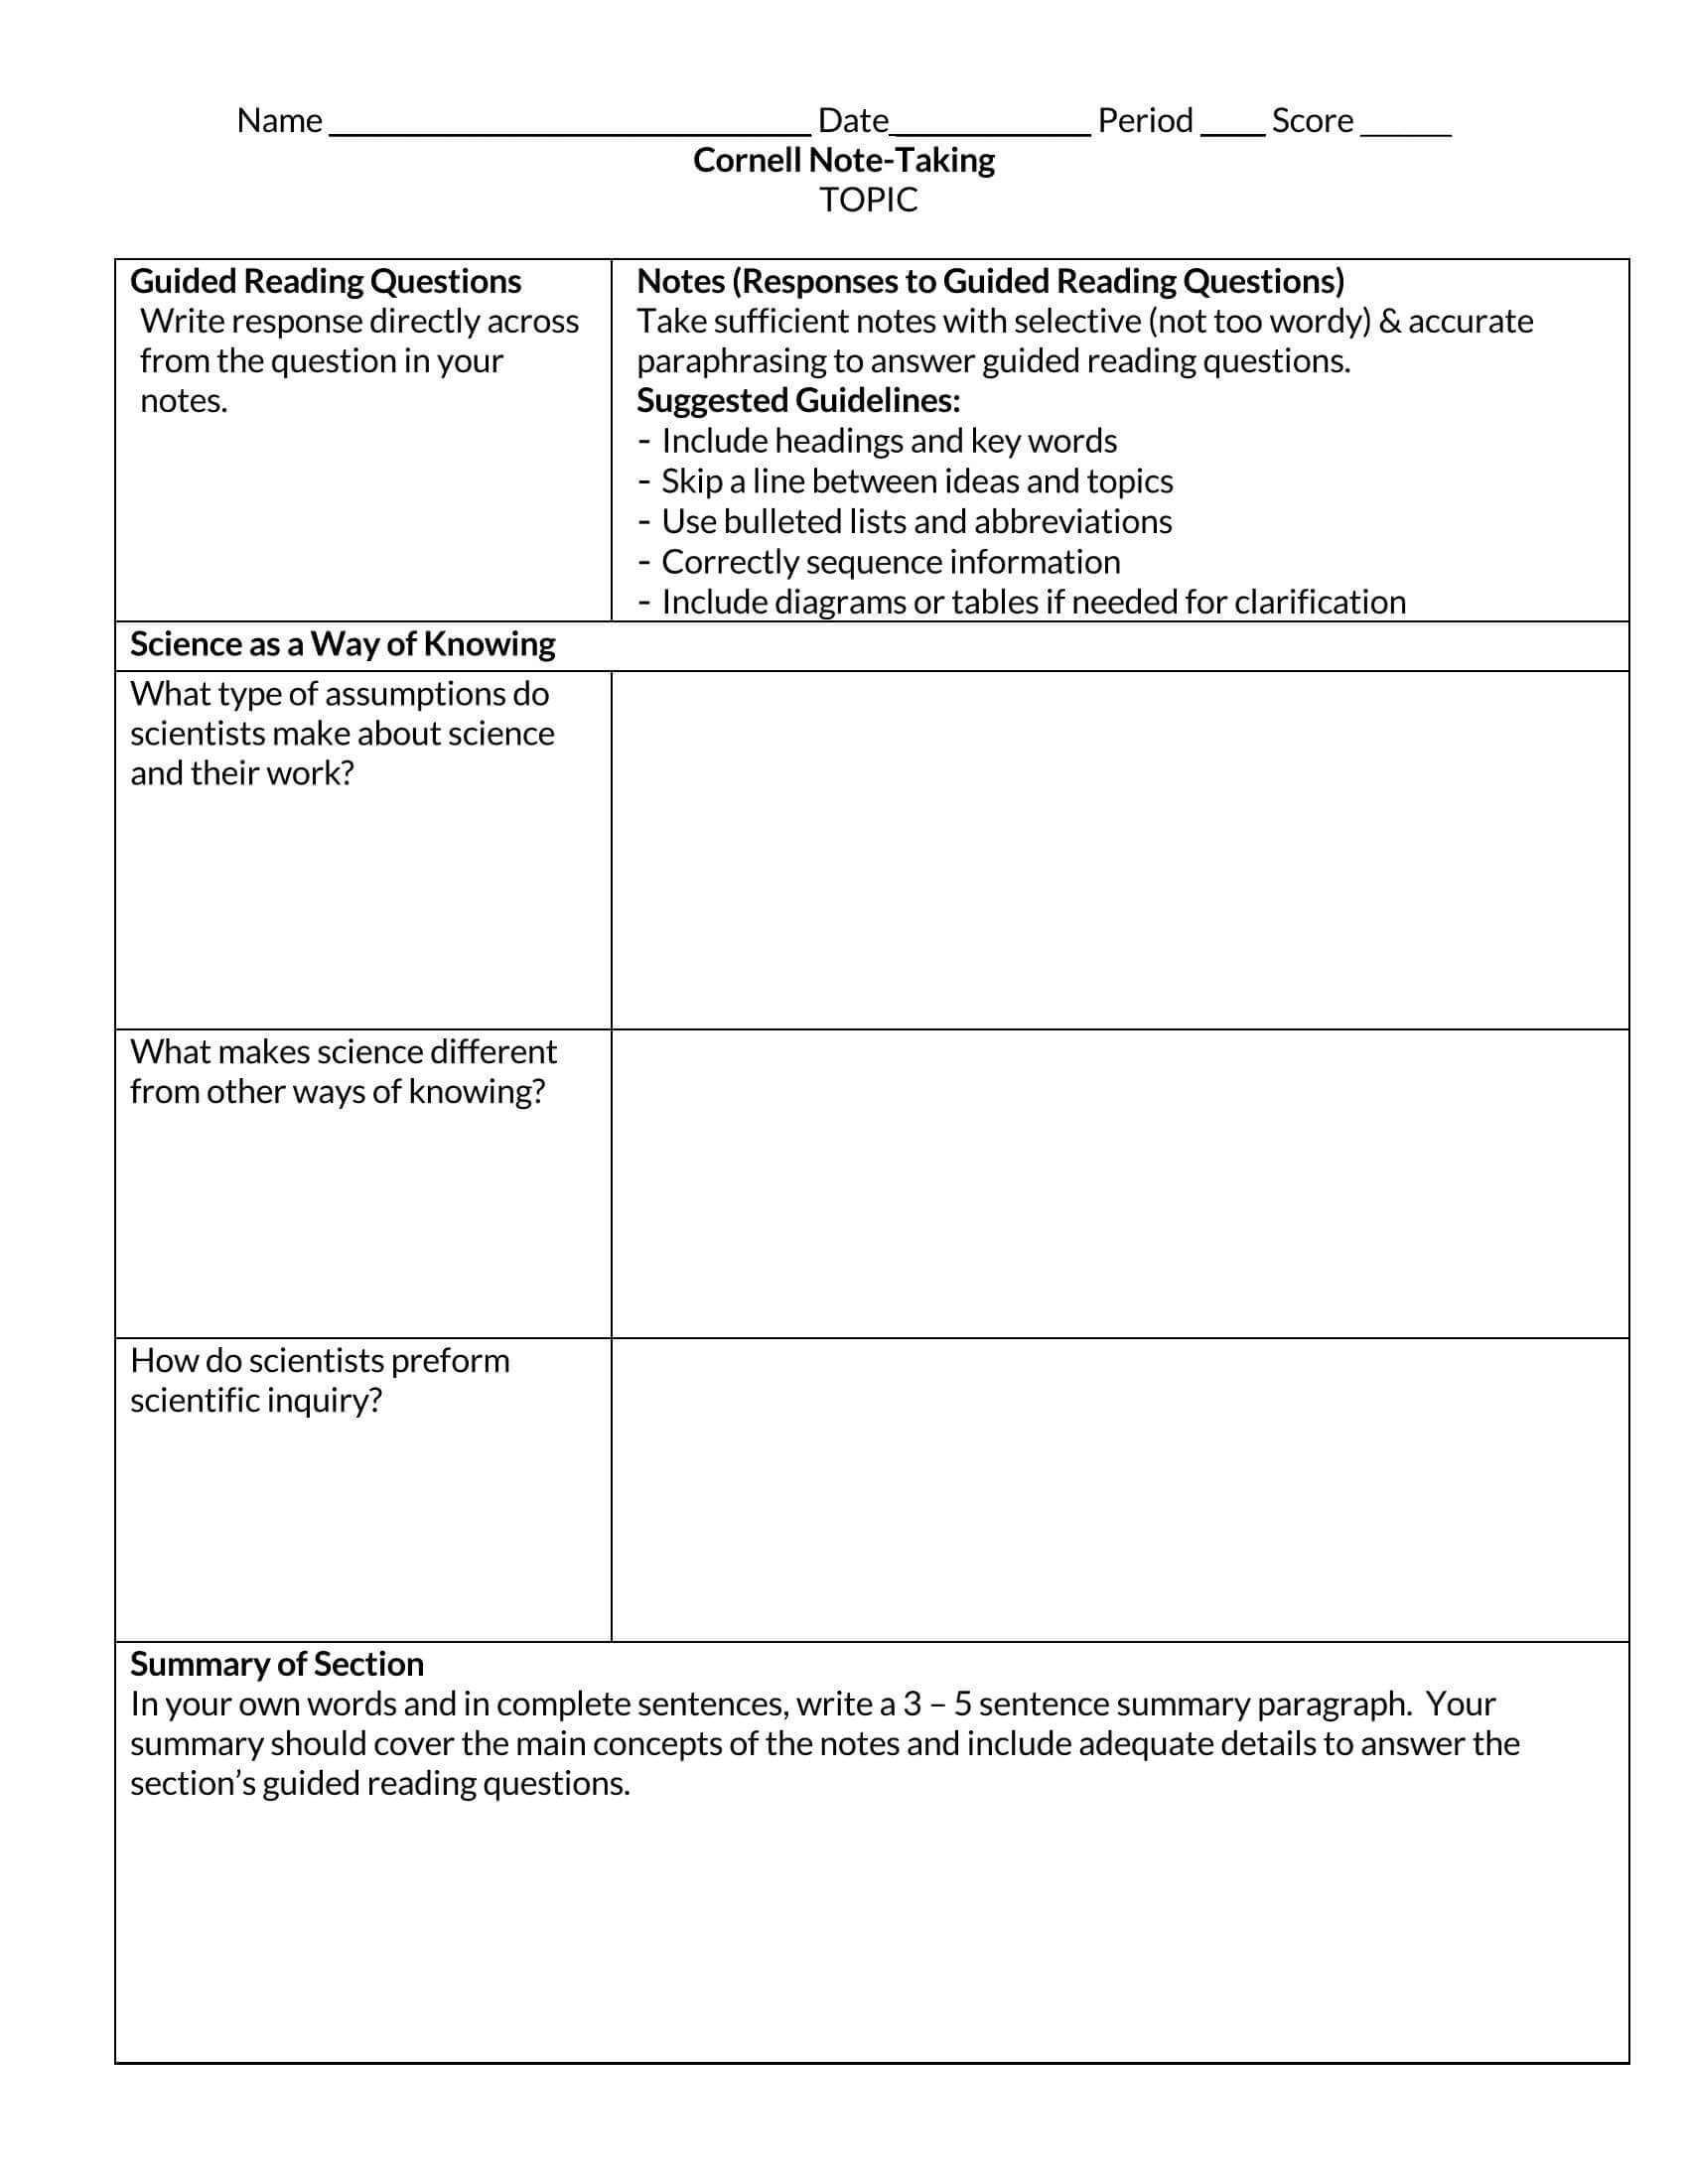 Free Cornell Note Template Word